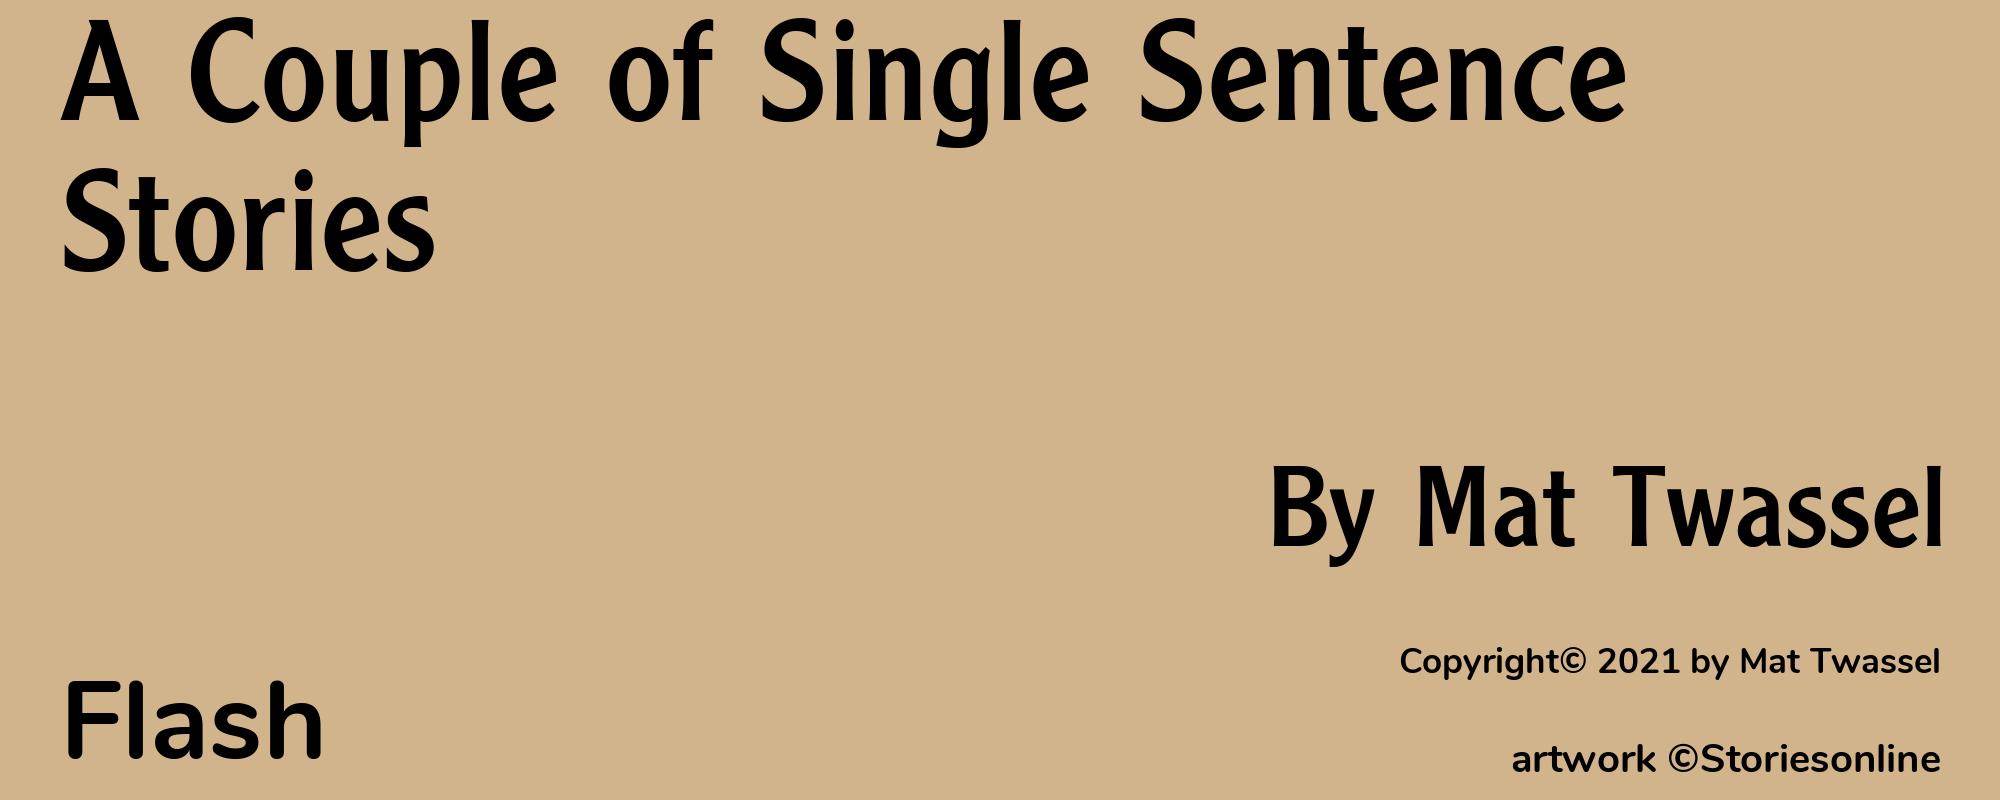 A Couple of Single Sentence Stories - Cover